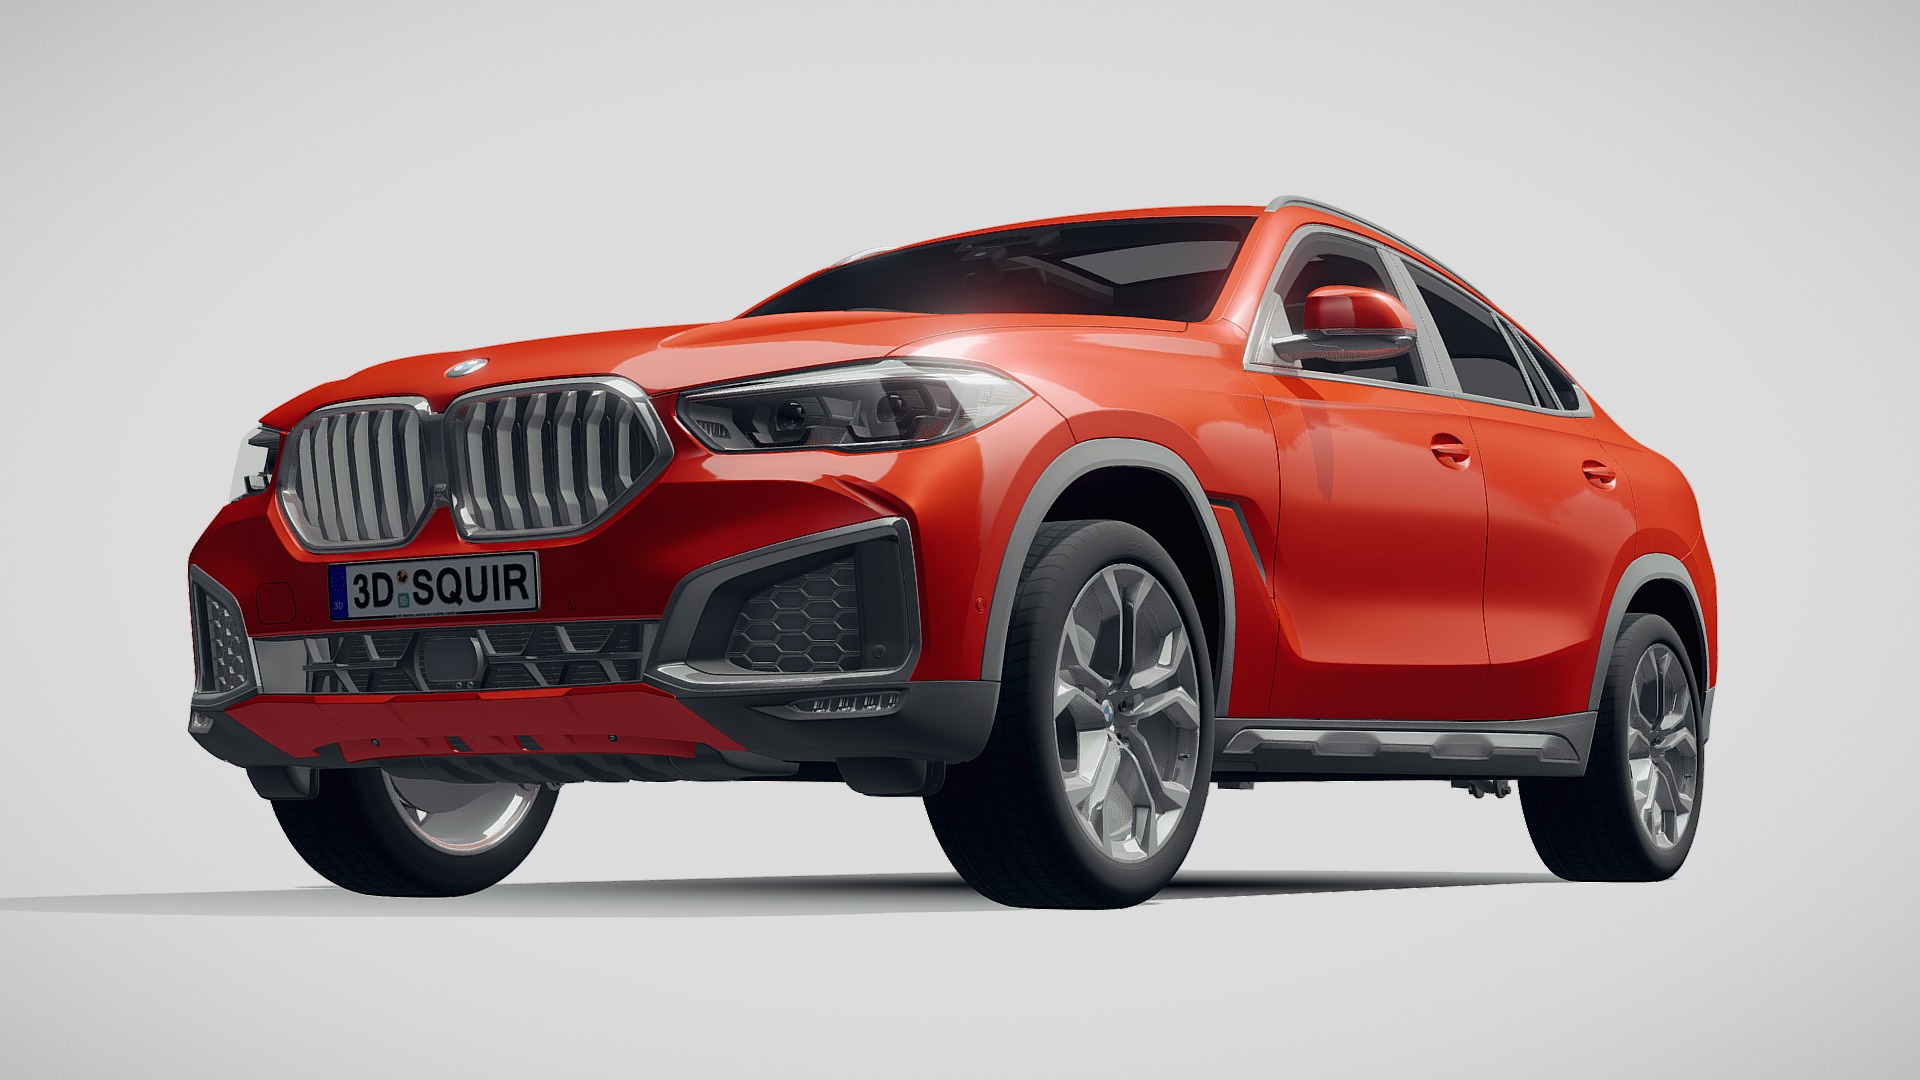 3D model BMW X6 G06 2020 - This is a 3D model of the BMW X6 G06 2020. The 3D model is about a red car with a white background.